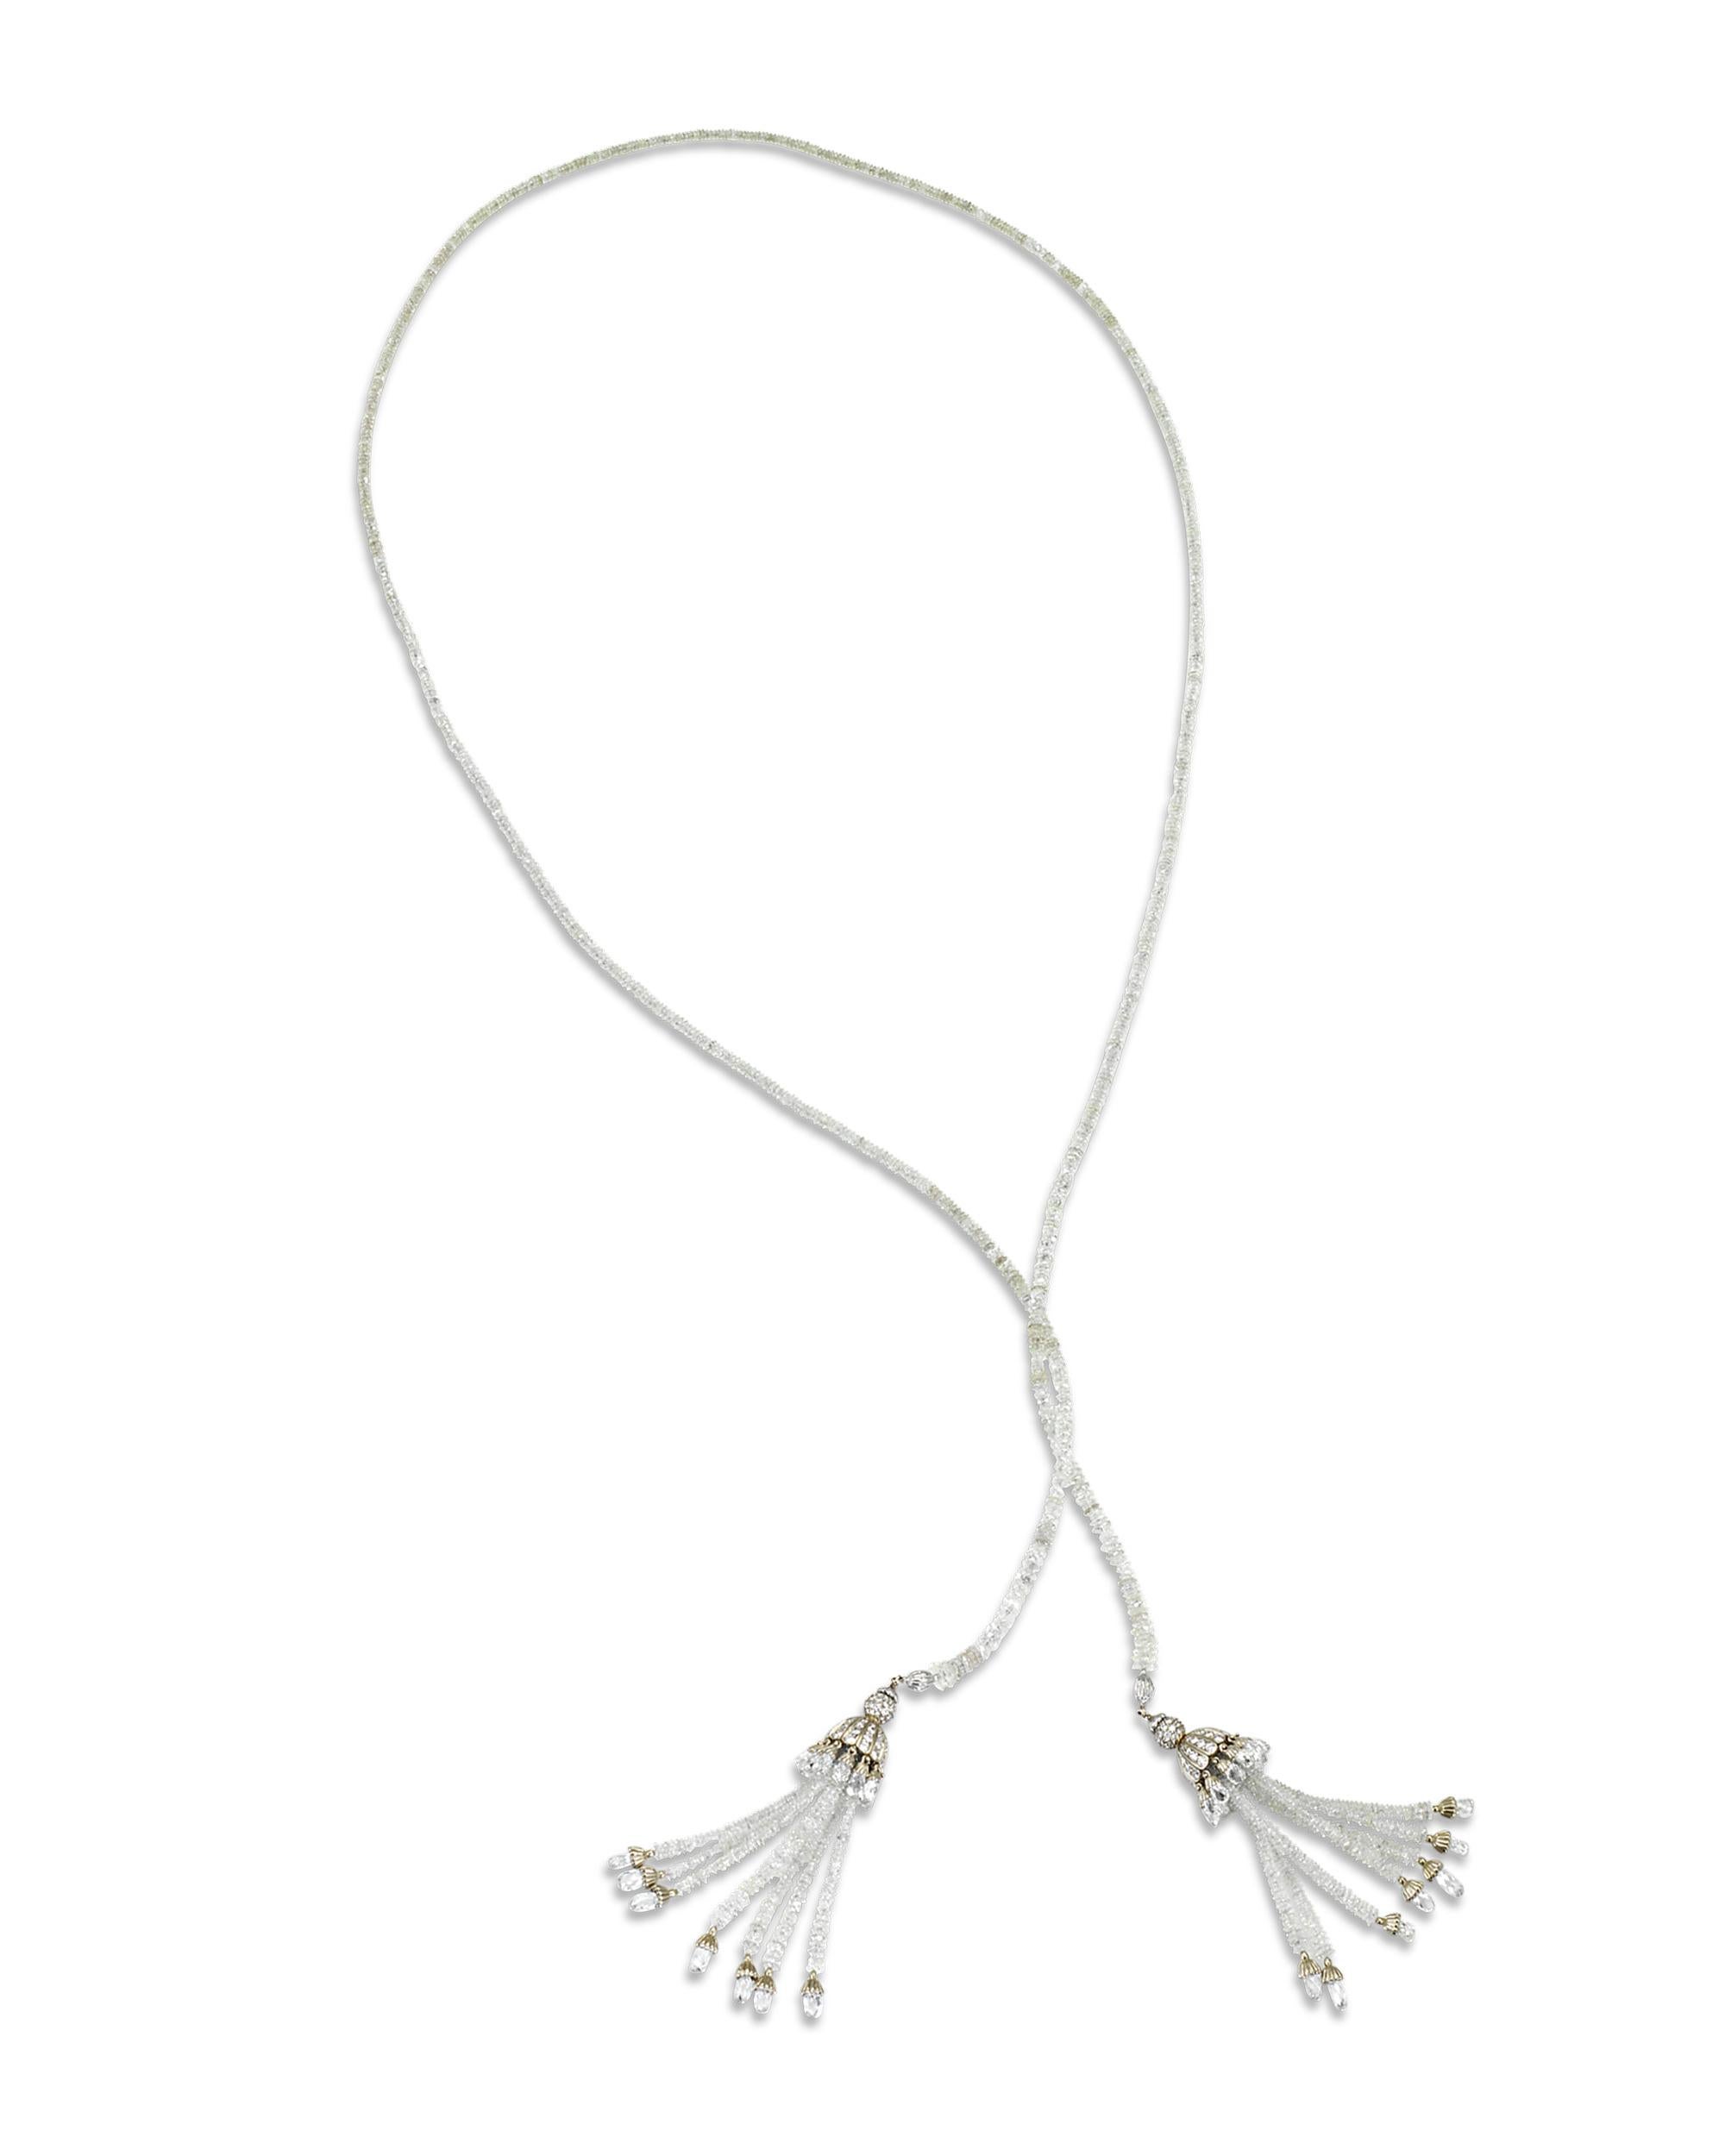 Featuring brilliant beads comprised entirely of white diamonds, this stunning necklace features a pair of exotic tassels as its centerpiece pendant. The tassels boast gorgeous briolette-cut white diamonds dangling from the fringe of each tassel. The